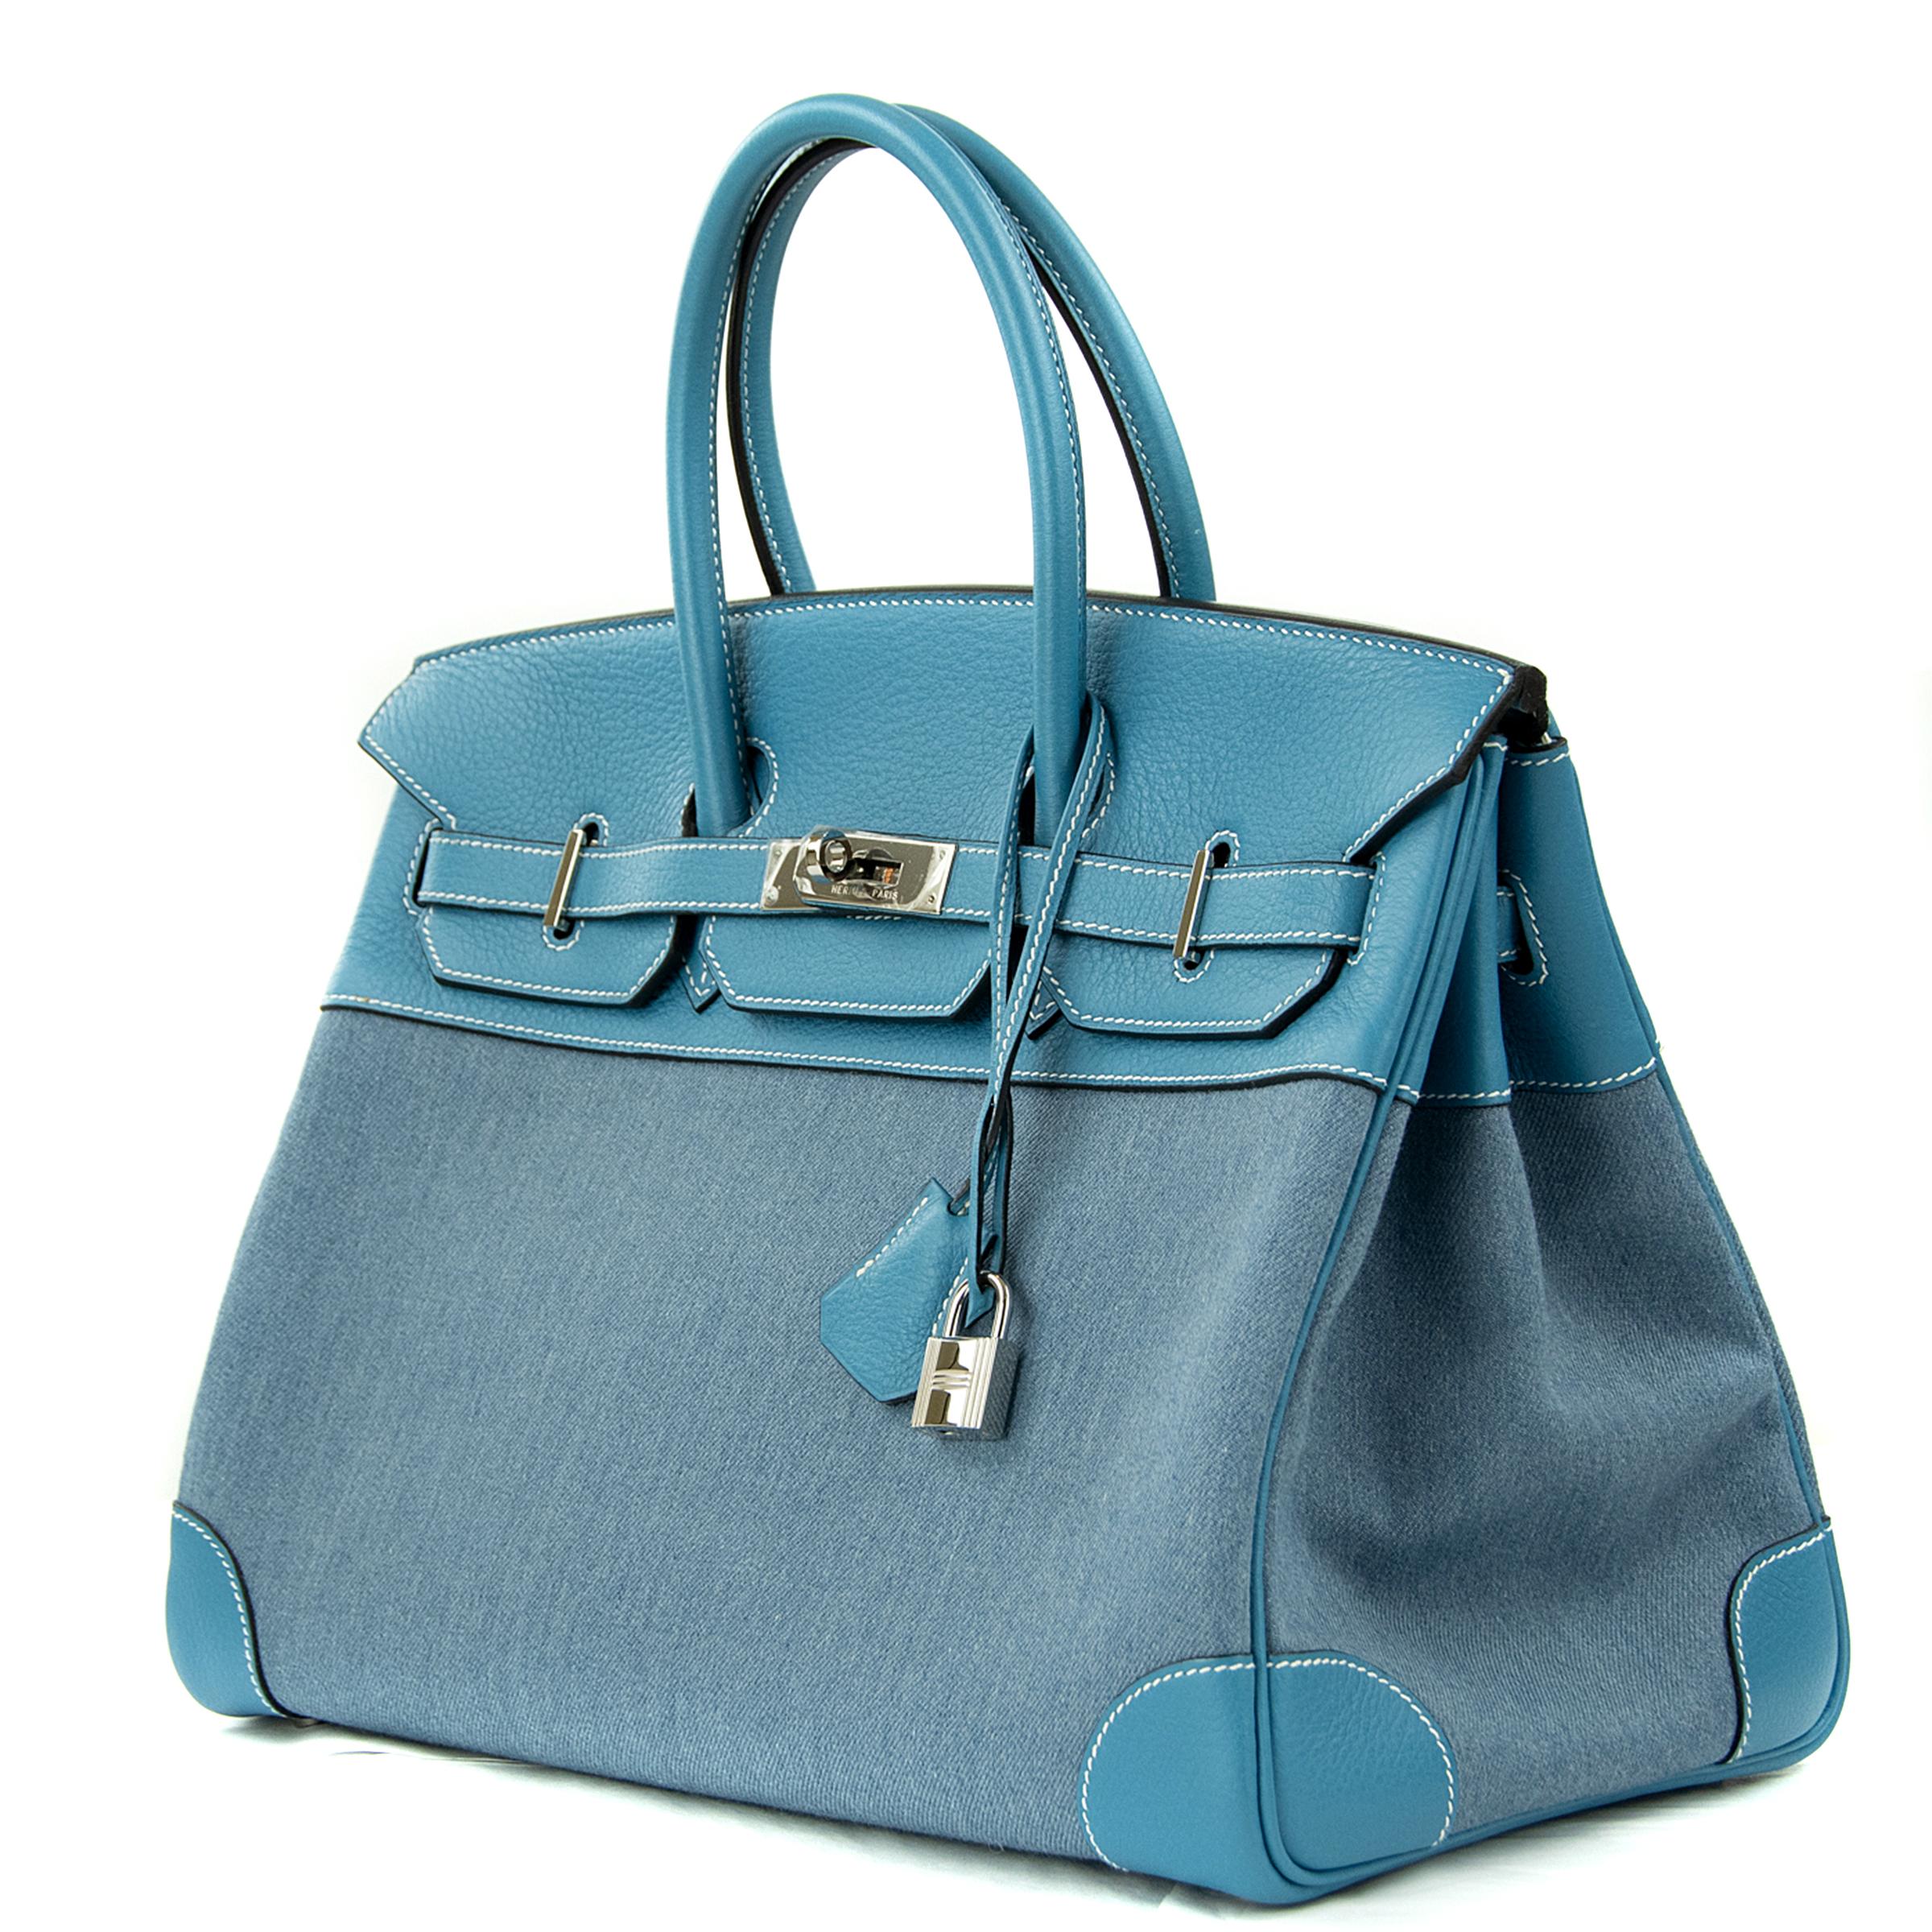 Hermes 35cm Birkin in Denim Blue Jean Togo. This iconic special order Hermes Birkin bag is timeless and chic. Fresh and crisp with palladium hardware.

    Condition: New or Never Used
    Made in France
    Bag Measures: 35cm (13.8